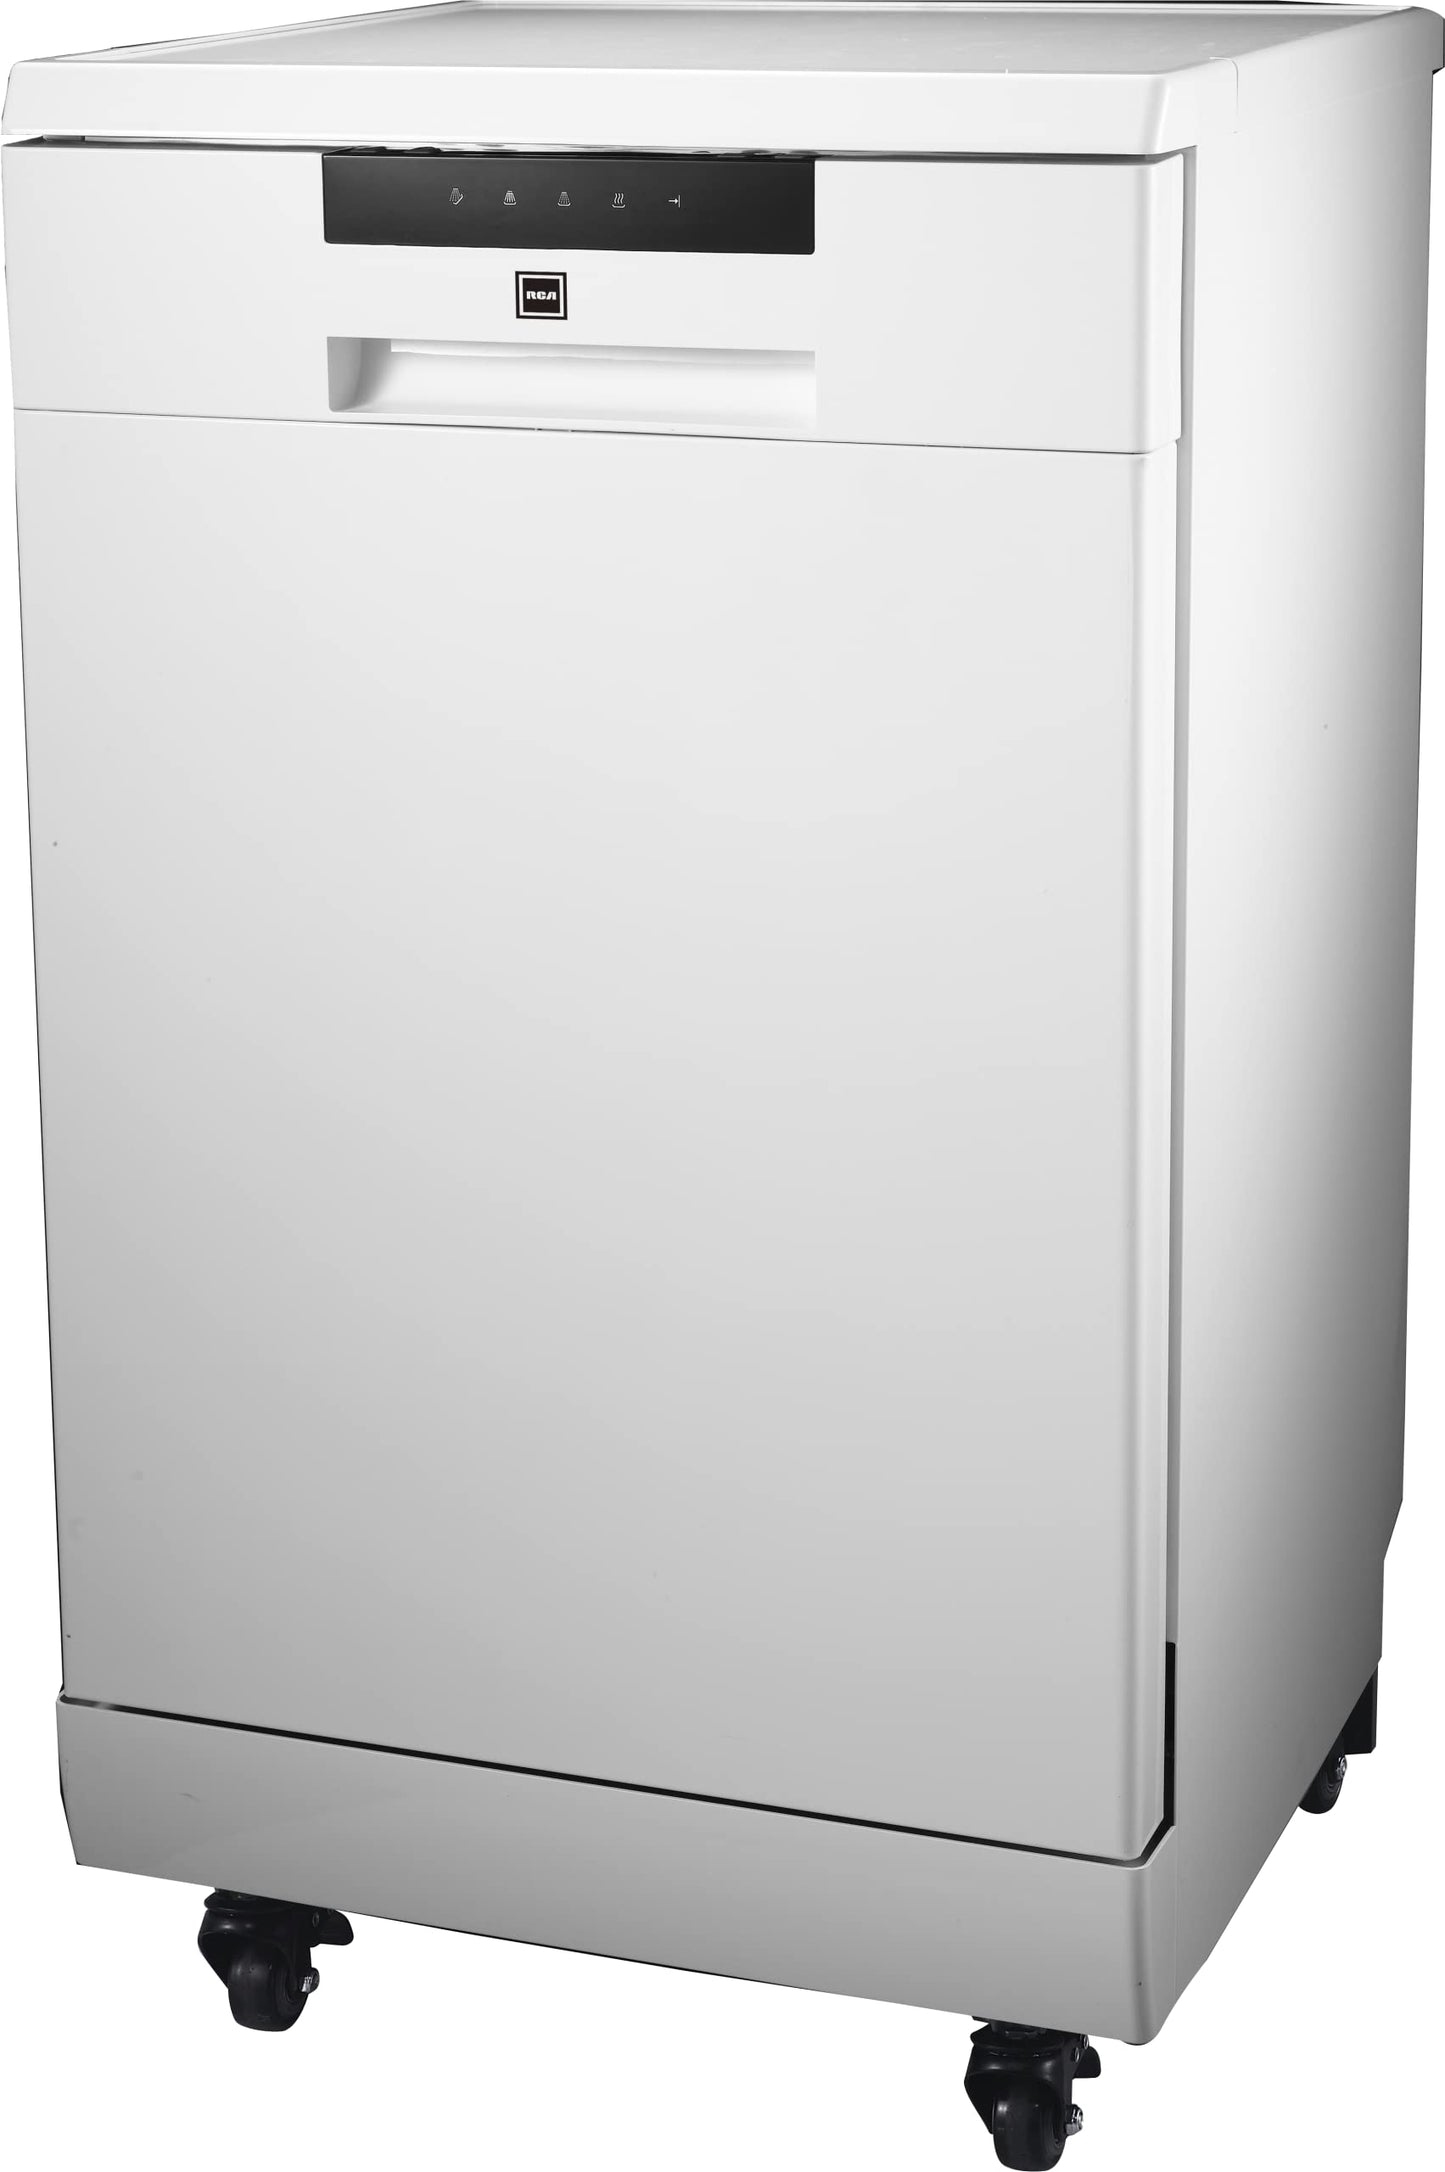 RCA RDW1809 Portable Dishwasher, 18in Wide, 8 Place Settings Capacity, White